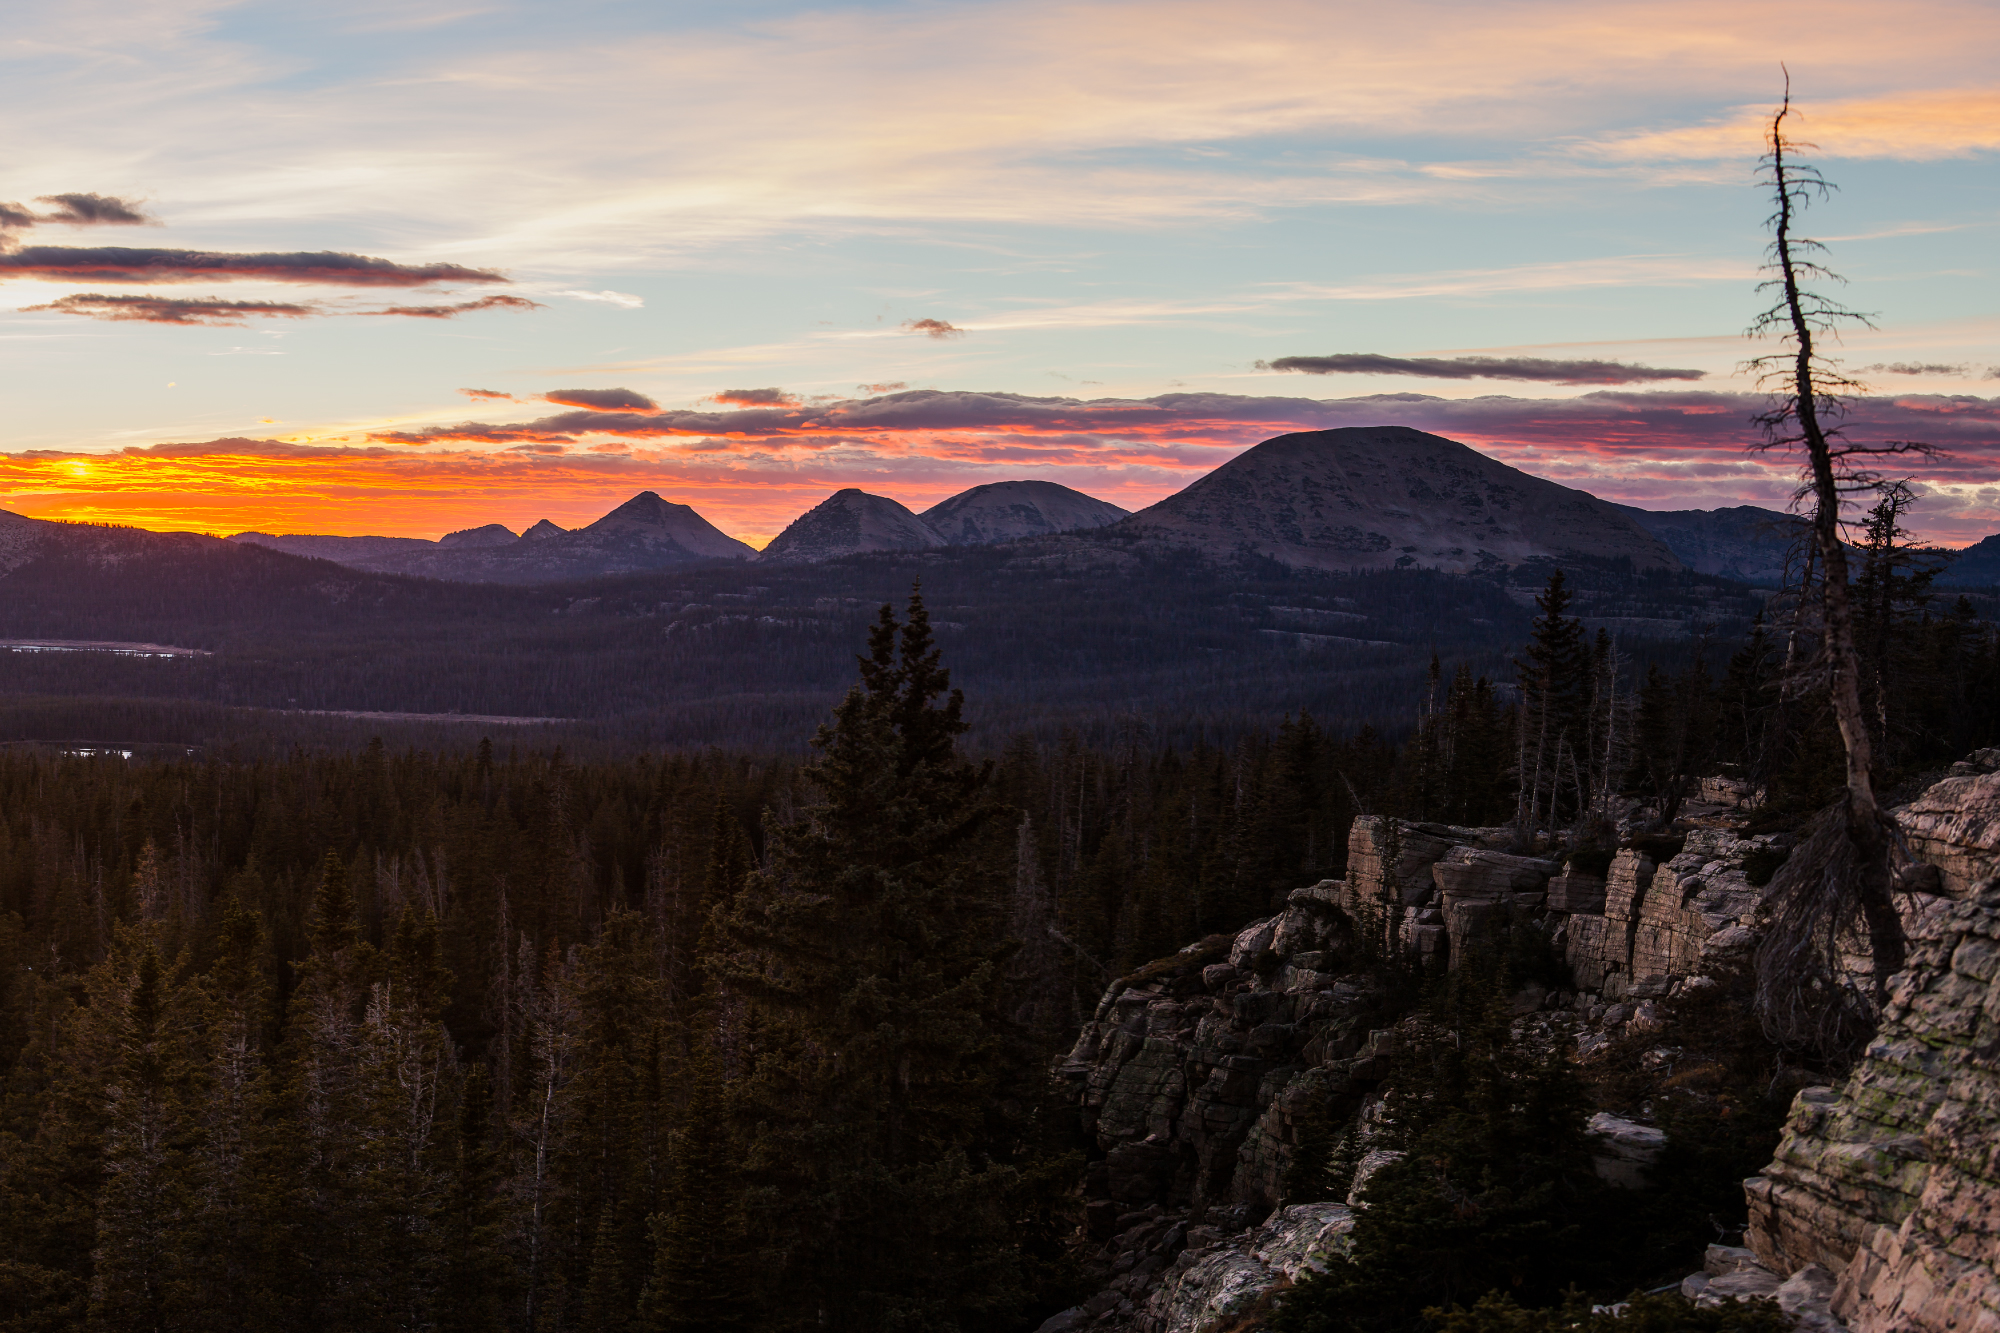 HDR Photography Workshop: Uinta Summit Panorama HDR | Pt.1 | How it Was Shot